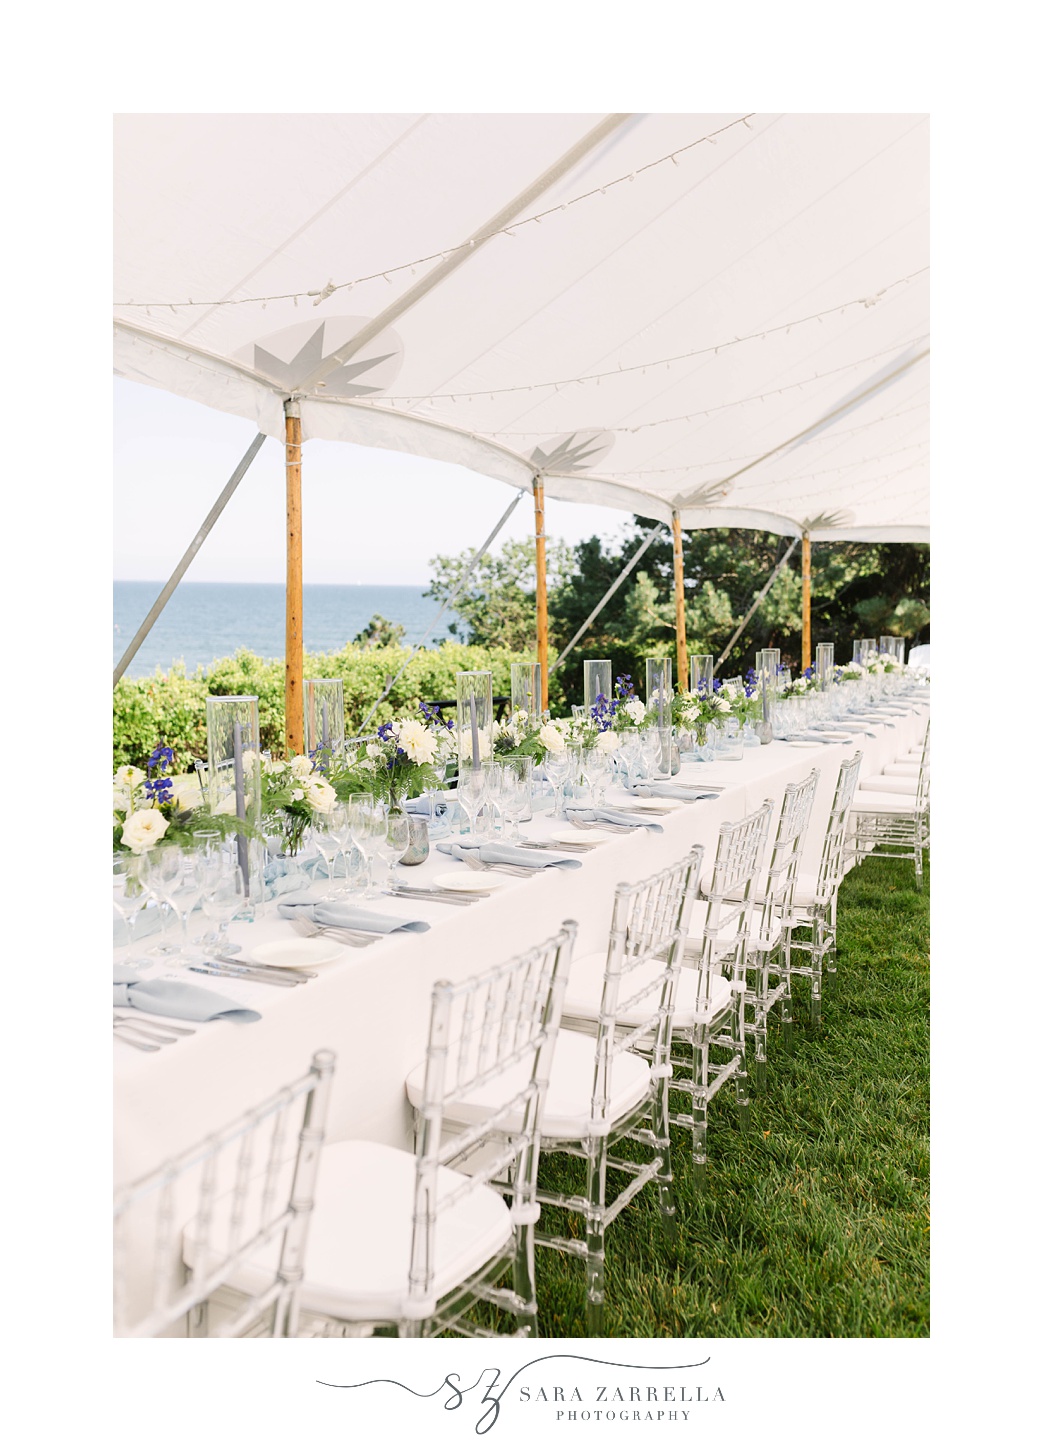 long family style tables for Newport RI wedding reception